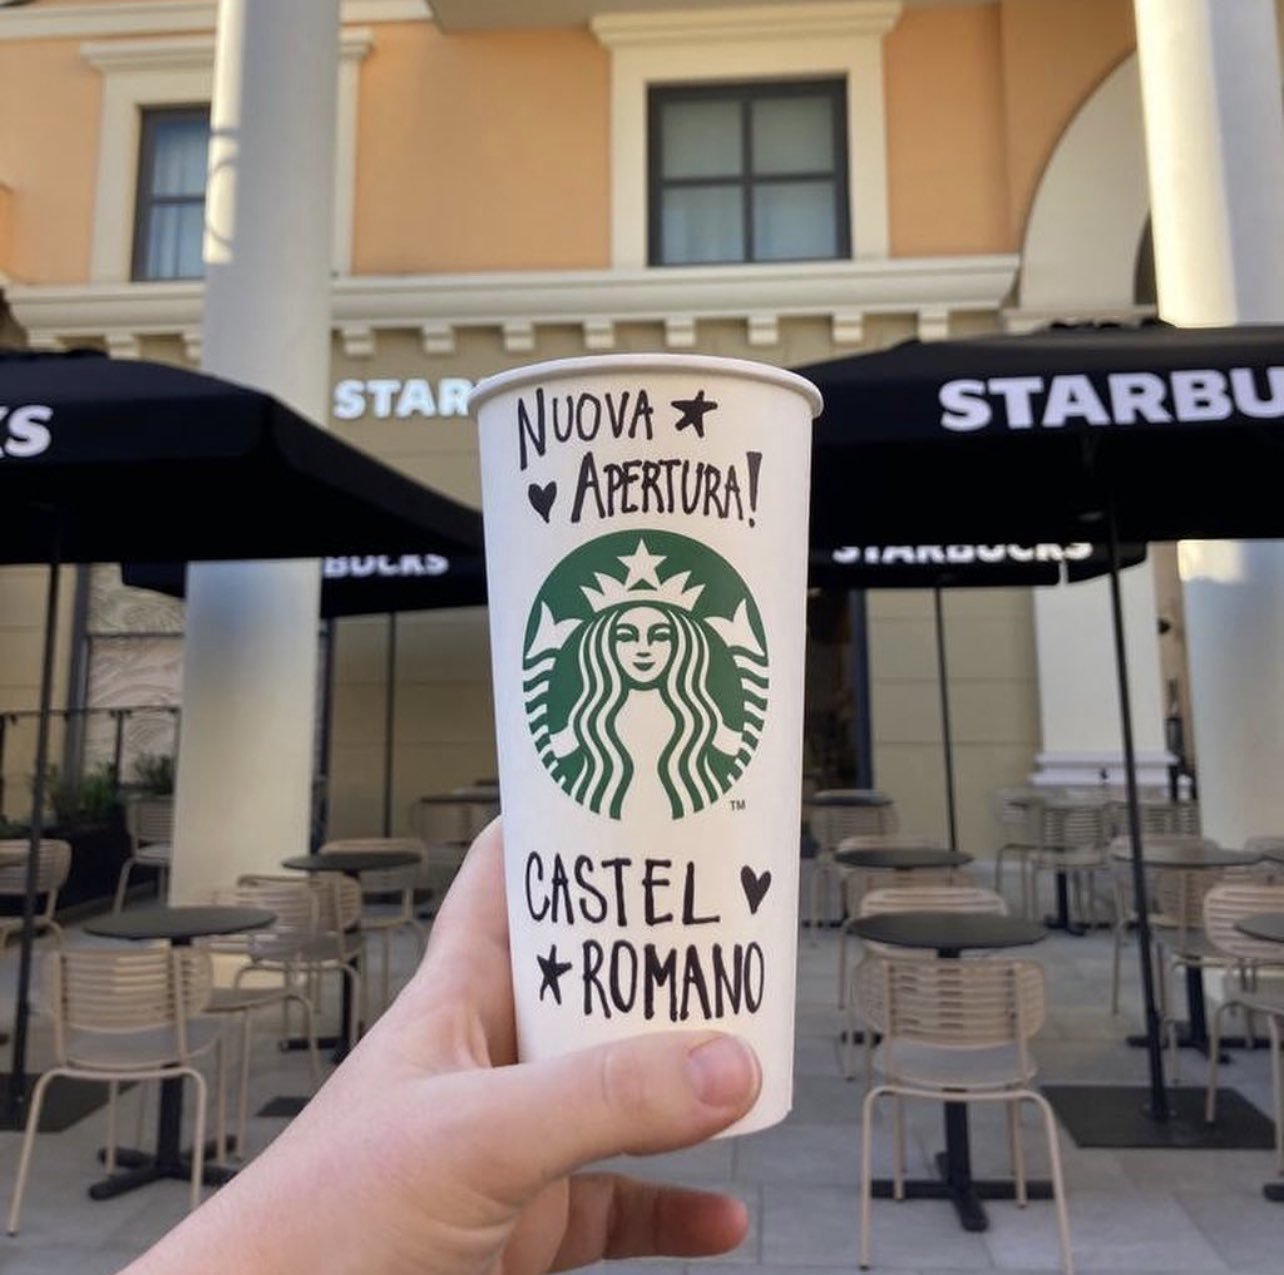 A picture of a Starbucks cup promoting the opening of a new store in the Italian capital of Rome circulates on social media.